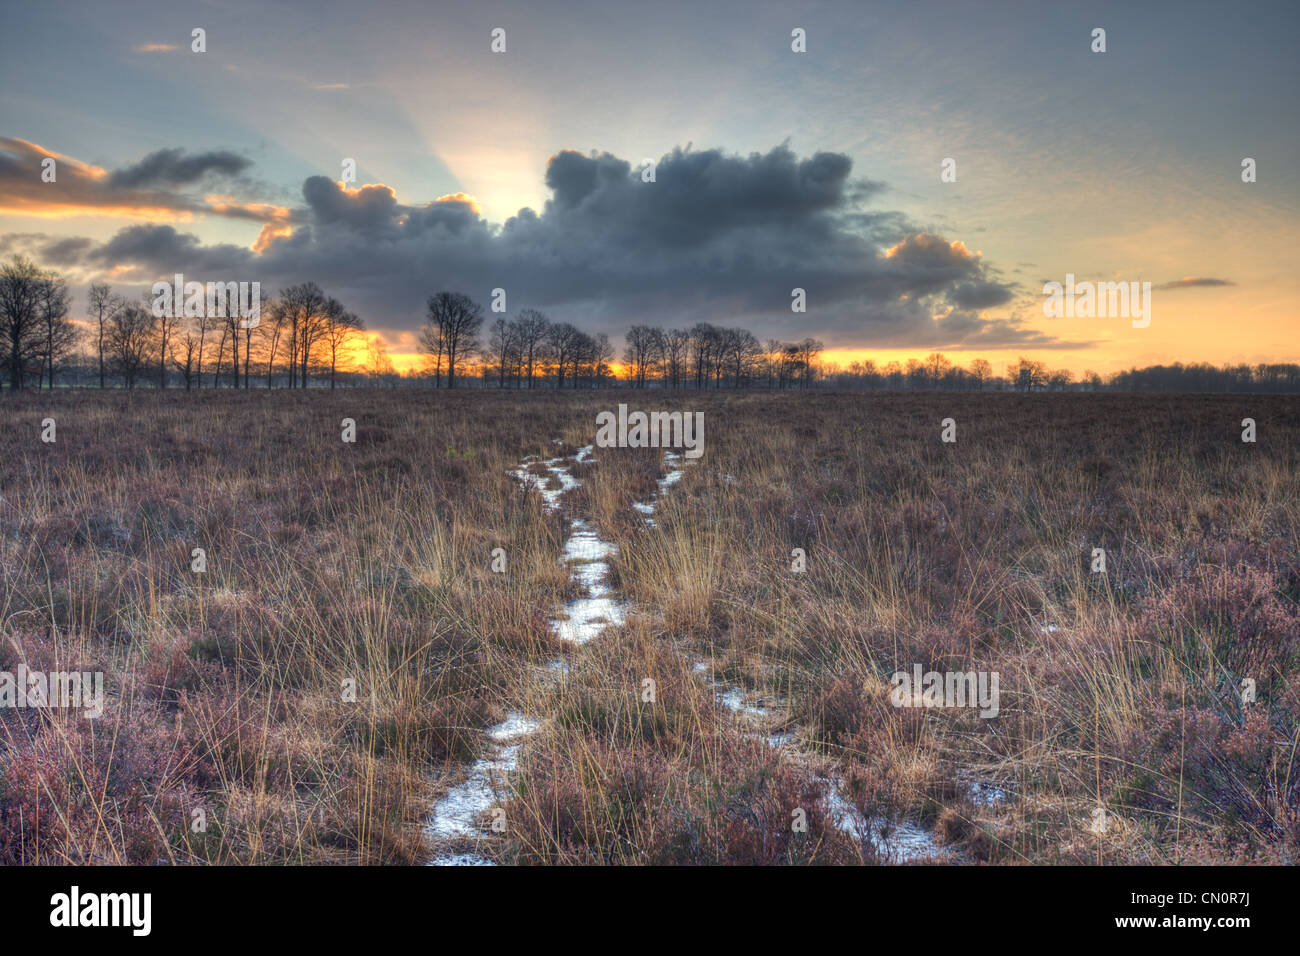 Crossing of twee small footpaths through a barren, swampy moor at sunrise. Stock Photo